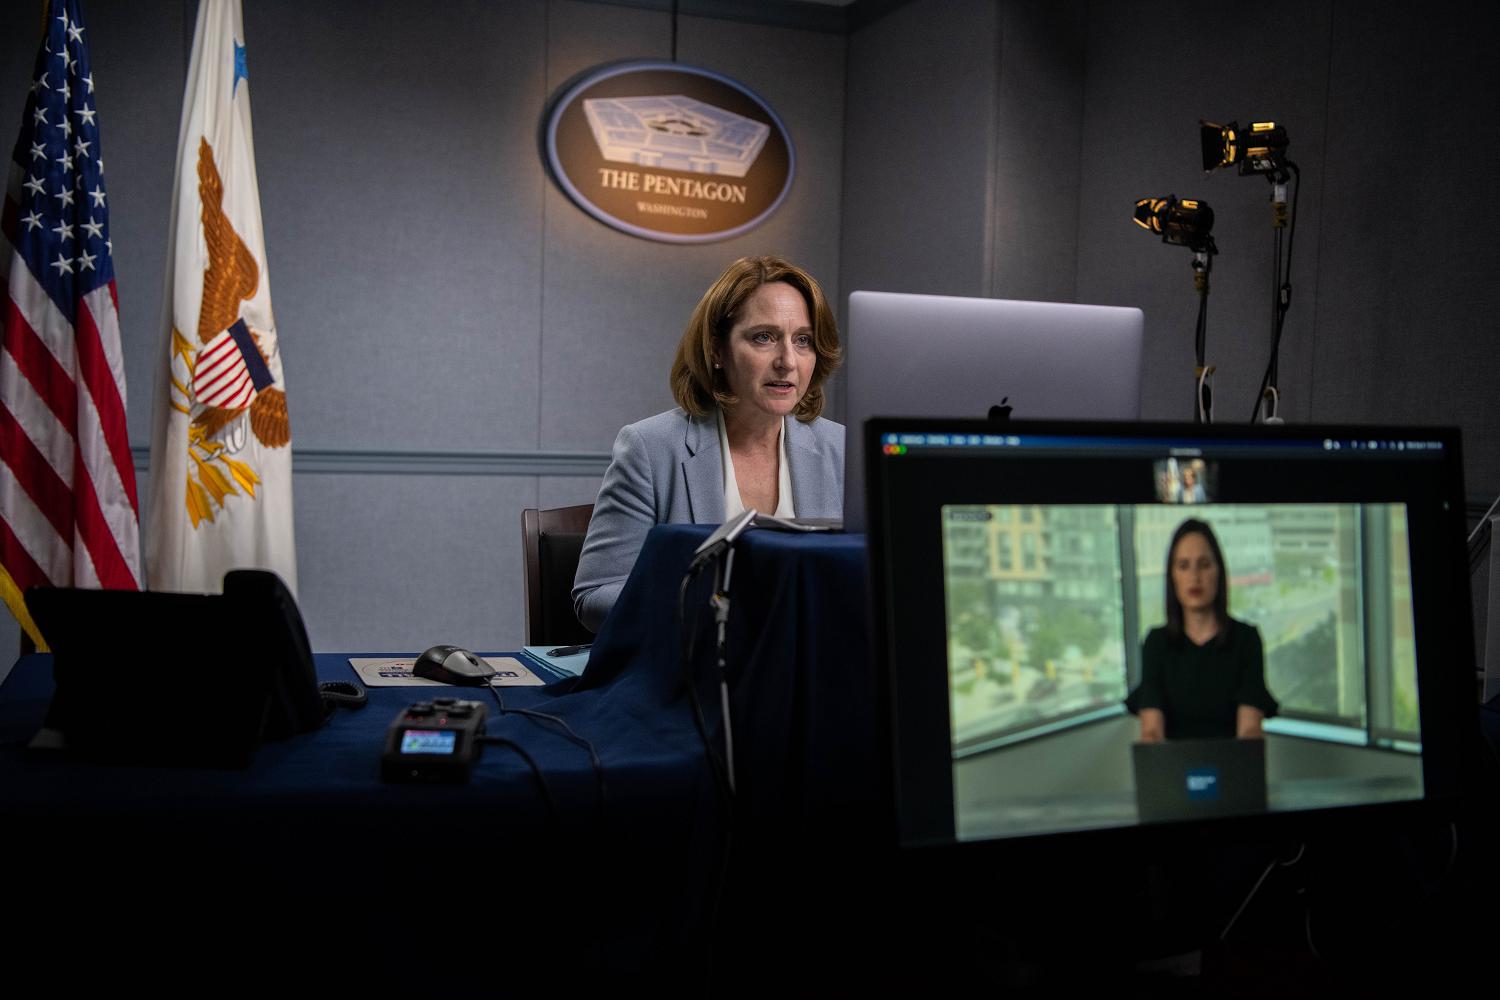 Deputy Secretary of Defense Dr. Kathleen H. Hicks participates as a keynote speaker in a video news teleconference during the 5th Annual Defense News Conference from the Pentagon, Washington, D.C., Sept. 8, 2021. (DoD photo by Staff Sgt. Jack Sanders)